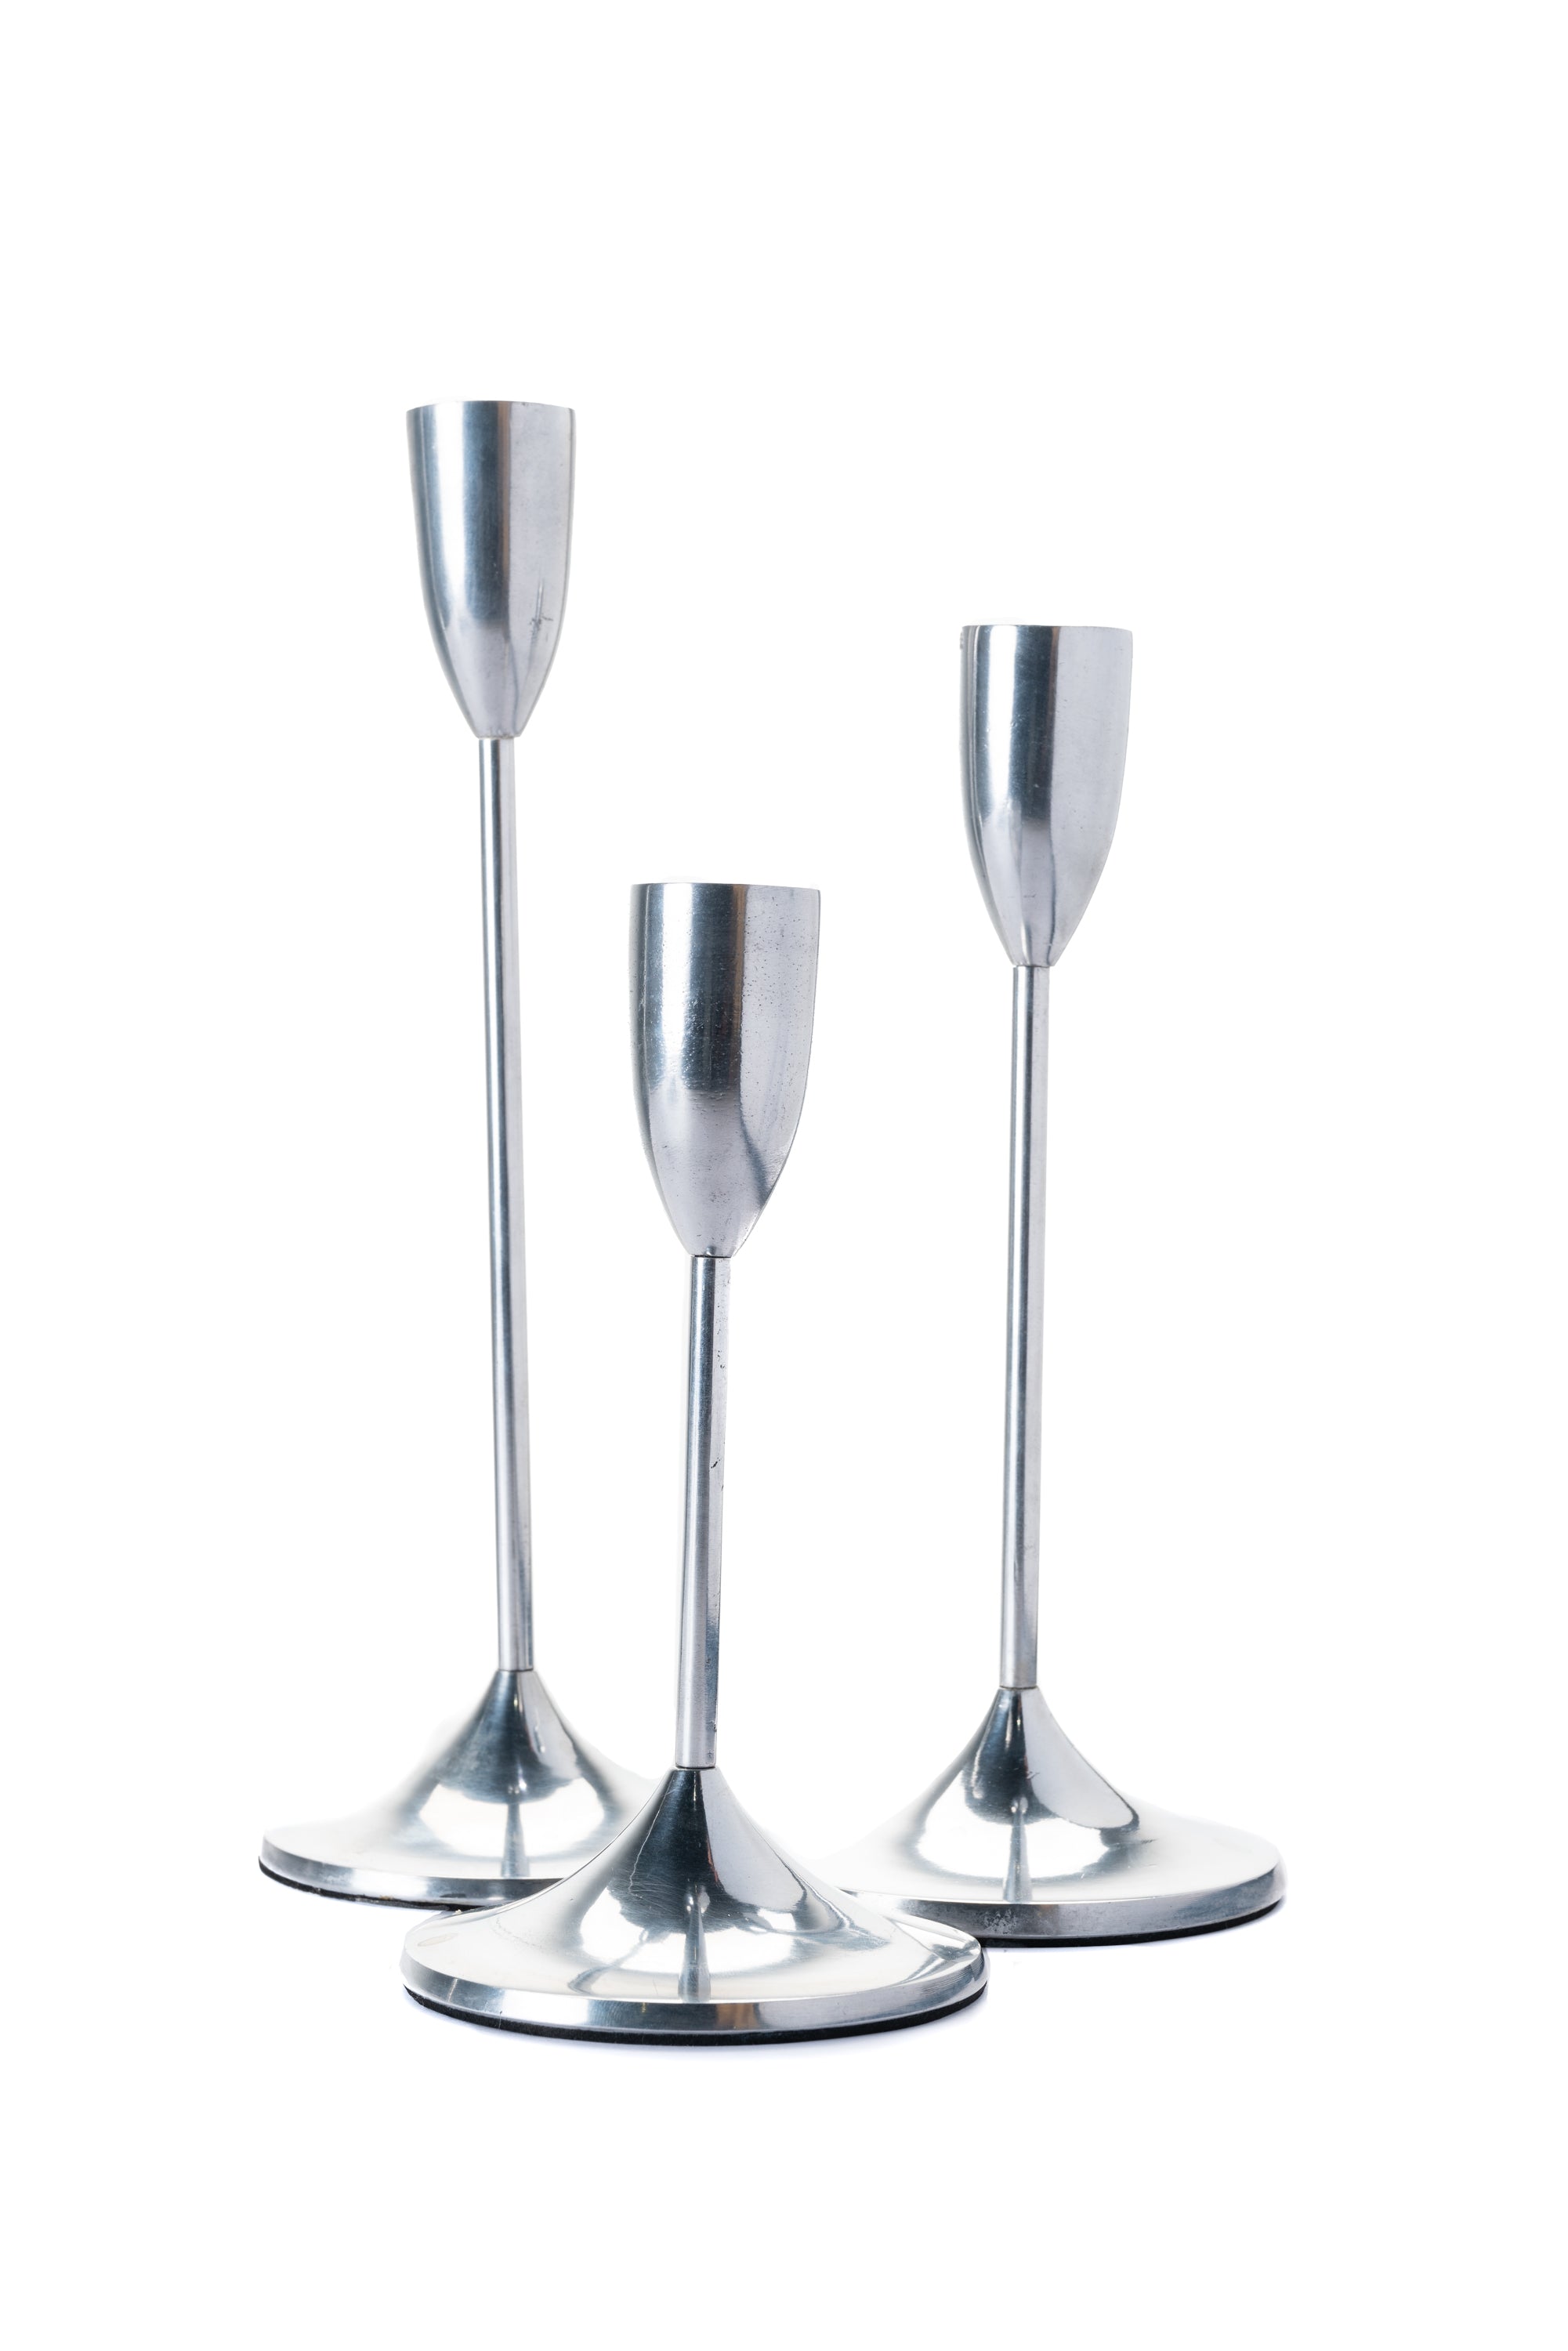 Silver Tapered Candlesticks for Hire | Gold Coast Wedding & Event Hire